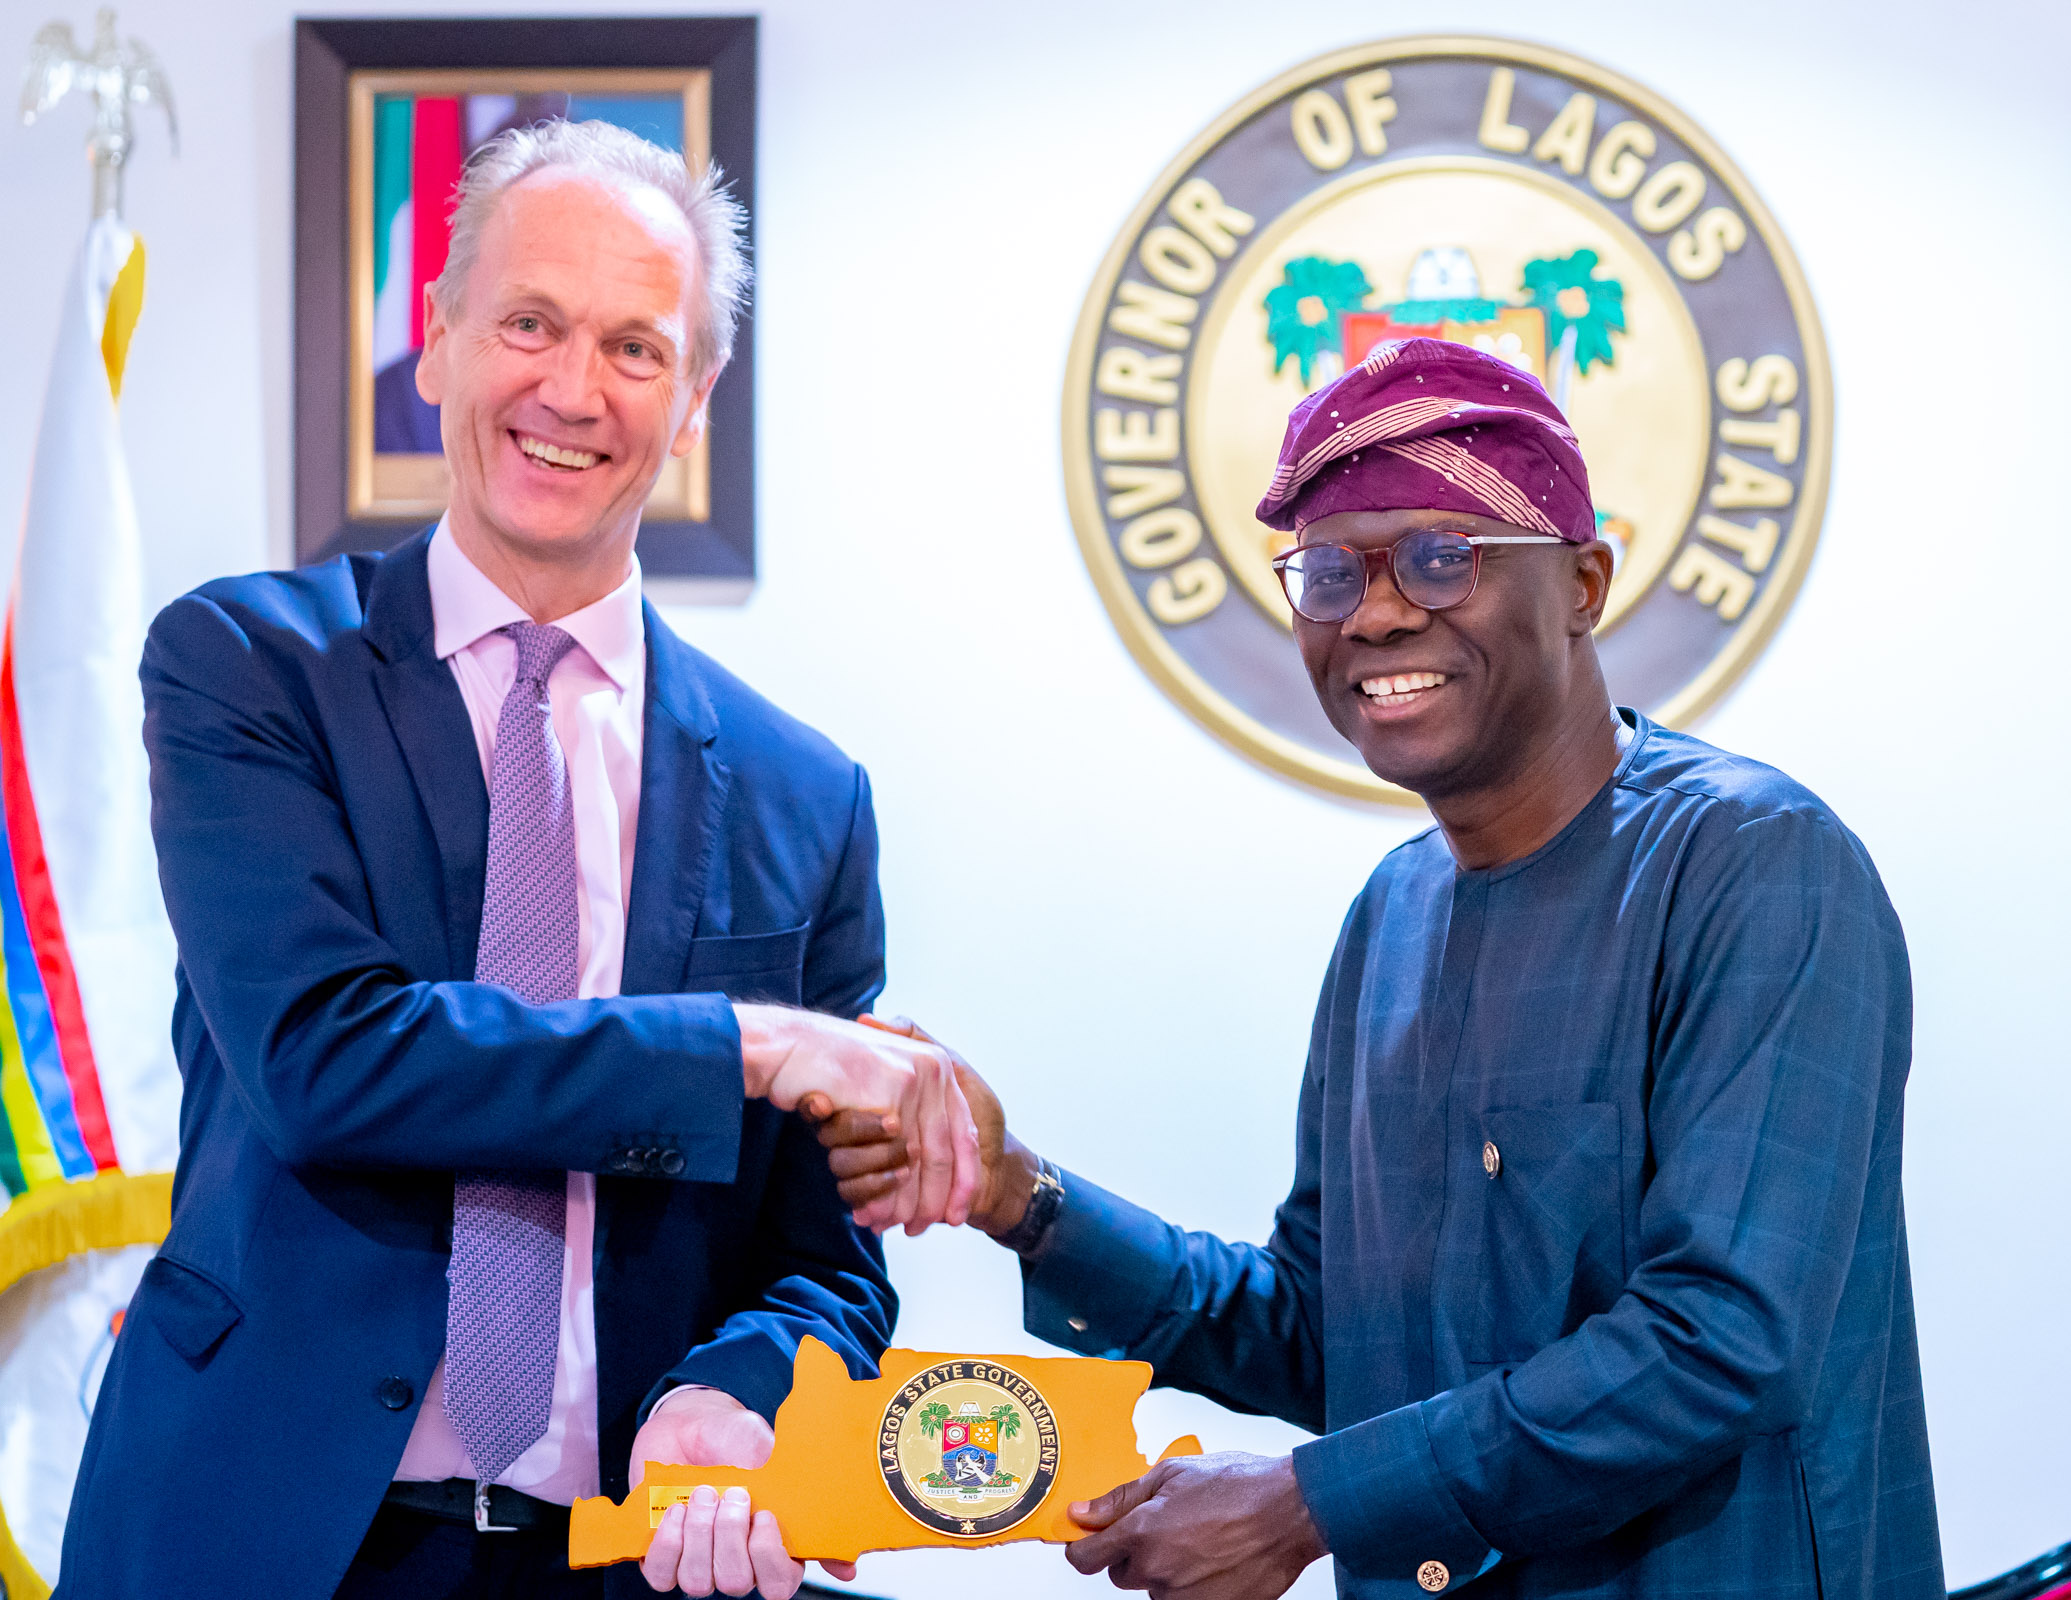 WE’LL BE CREATIVE IN THE FINANCIAL MODEL FOR LAGOS, SAYS SANWO-OLU